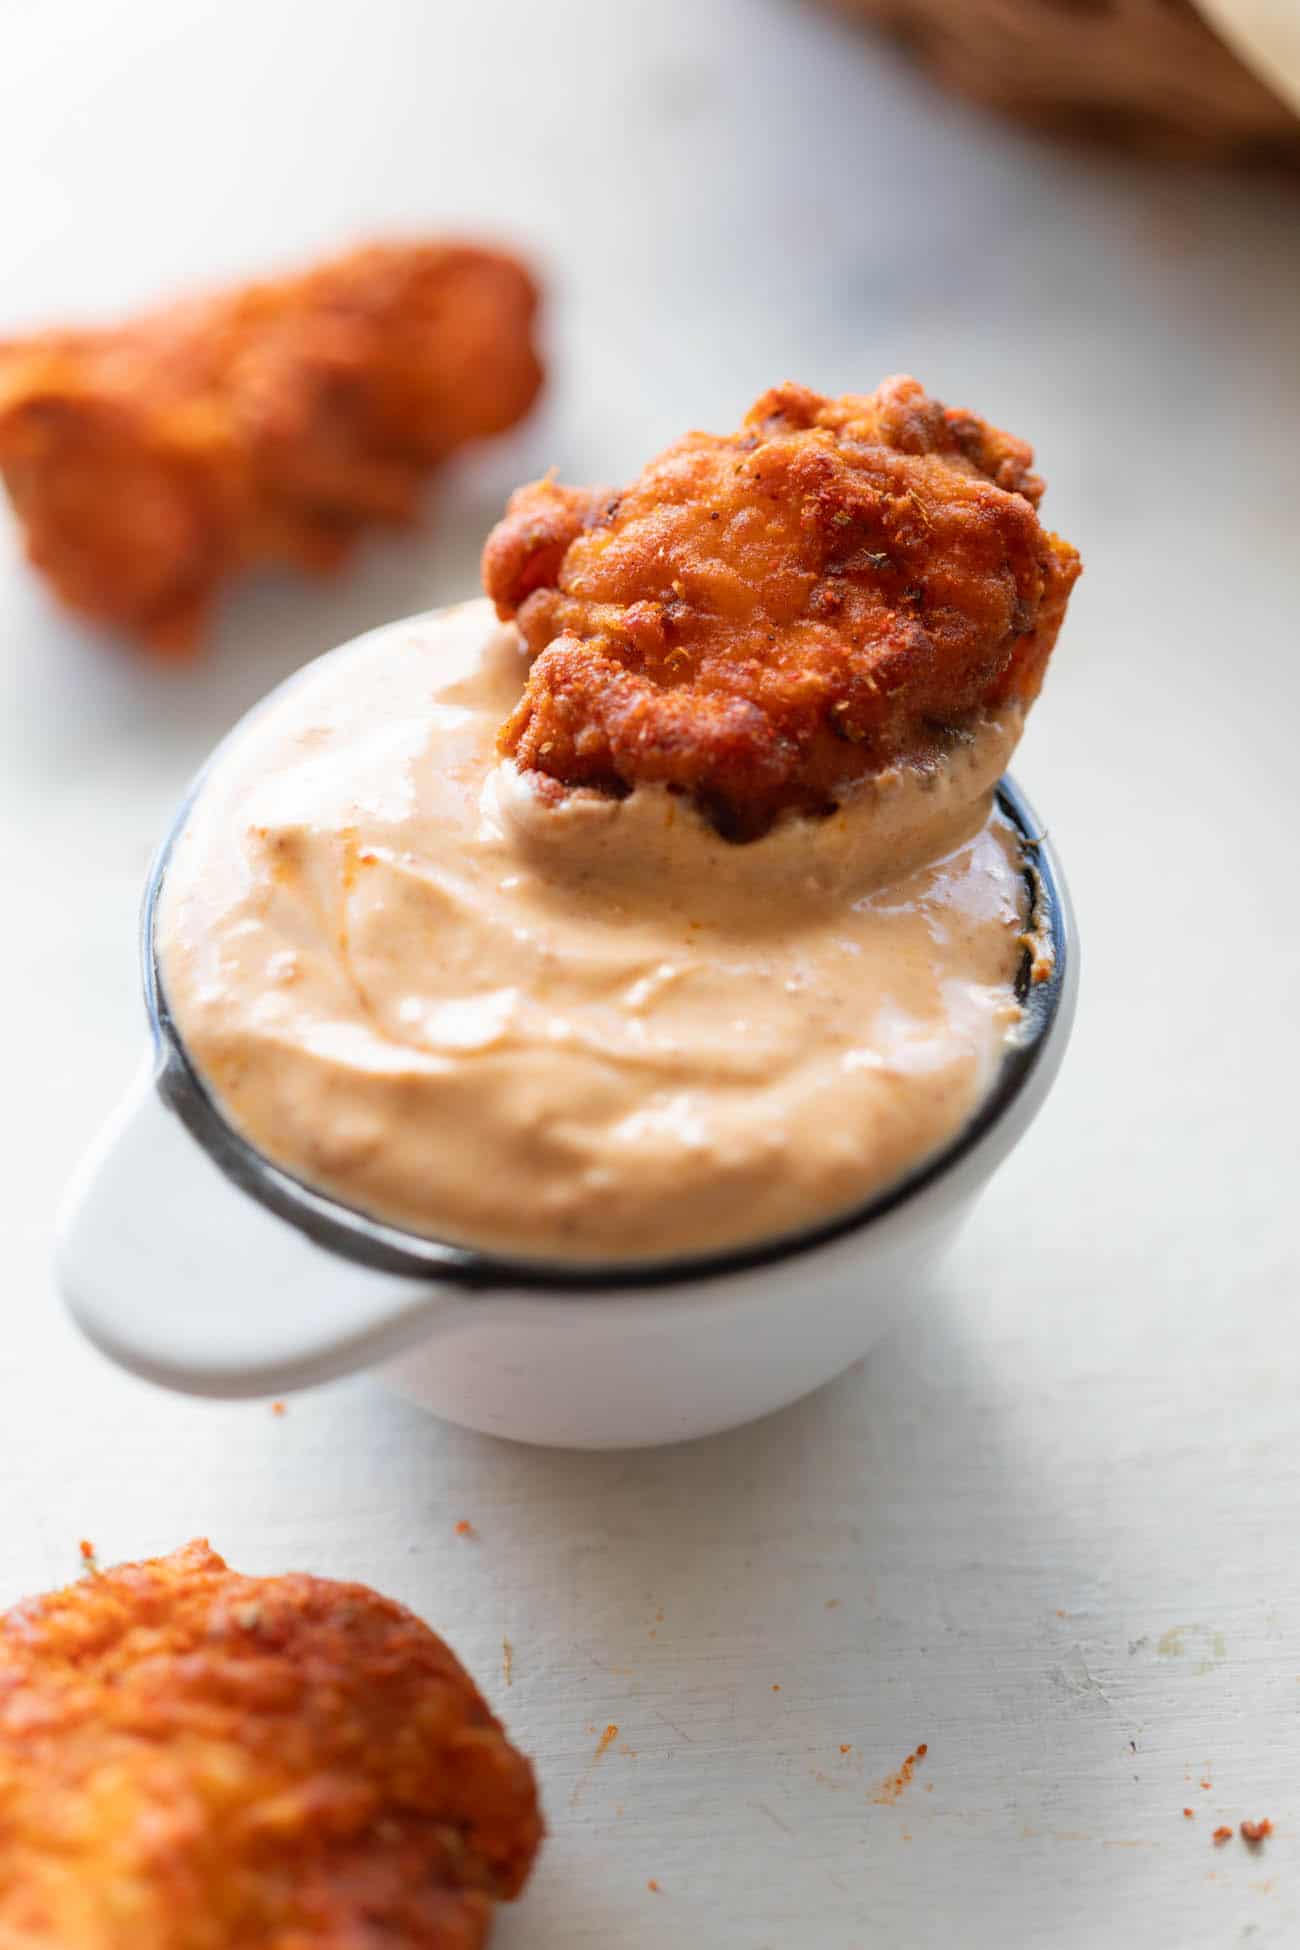 The popcorn chicken served with Sriracha Mayo Dipping sauce.